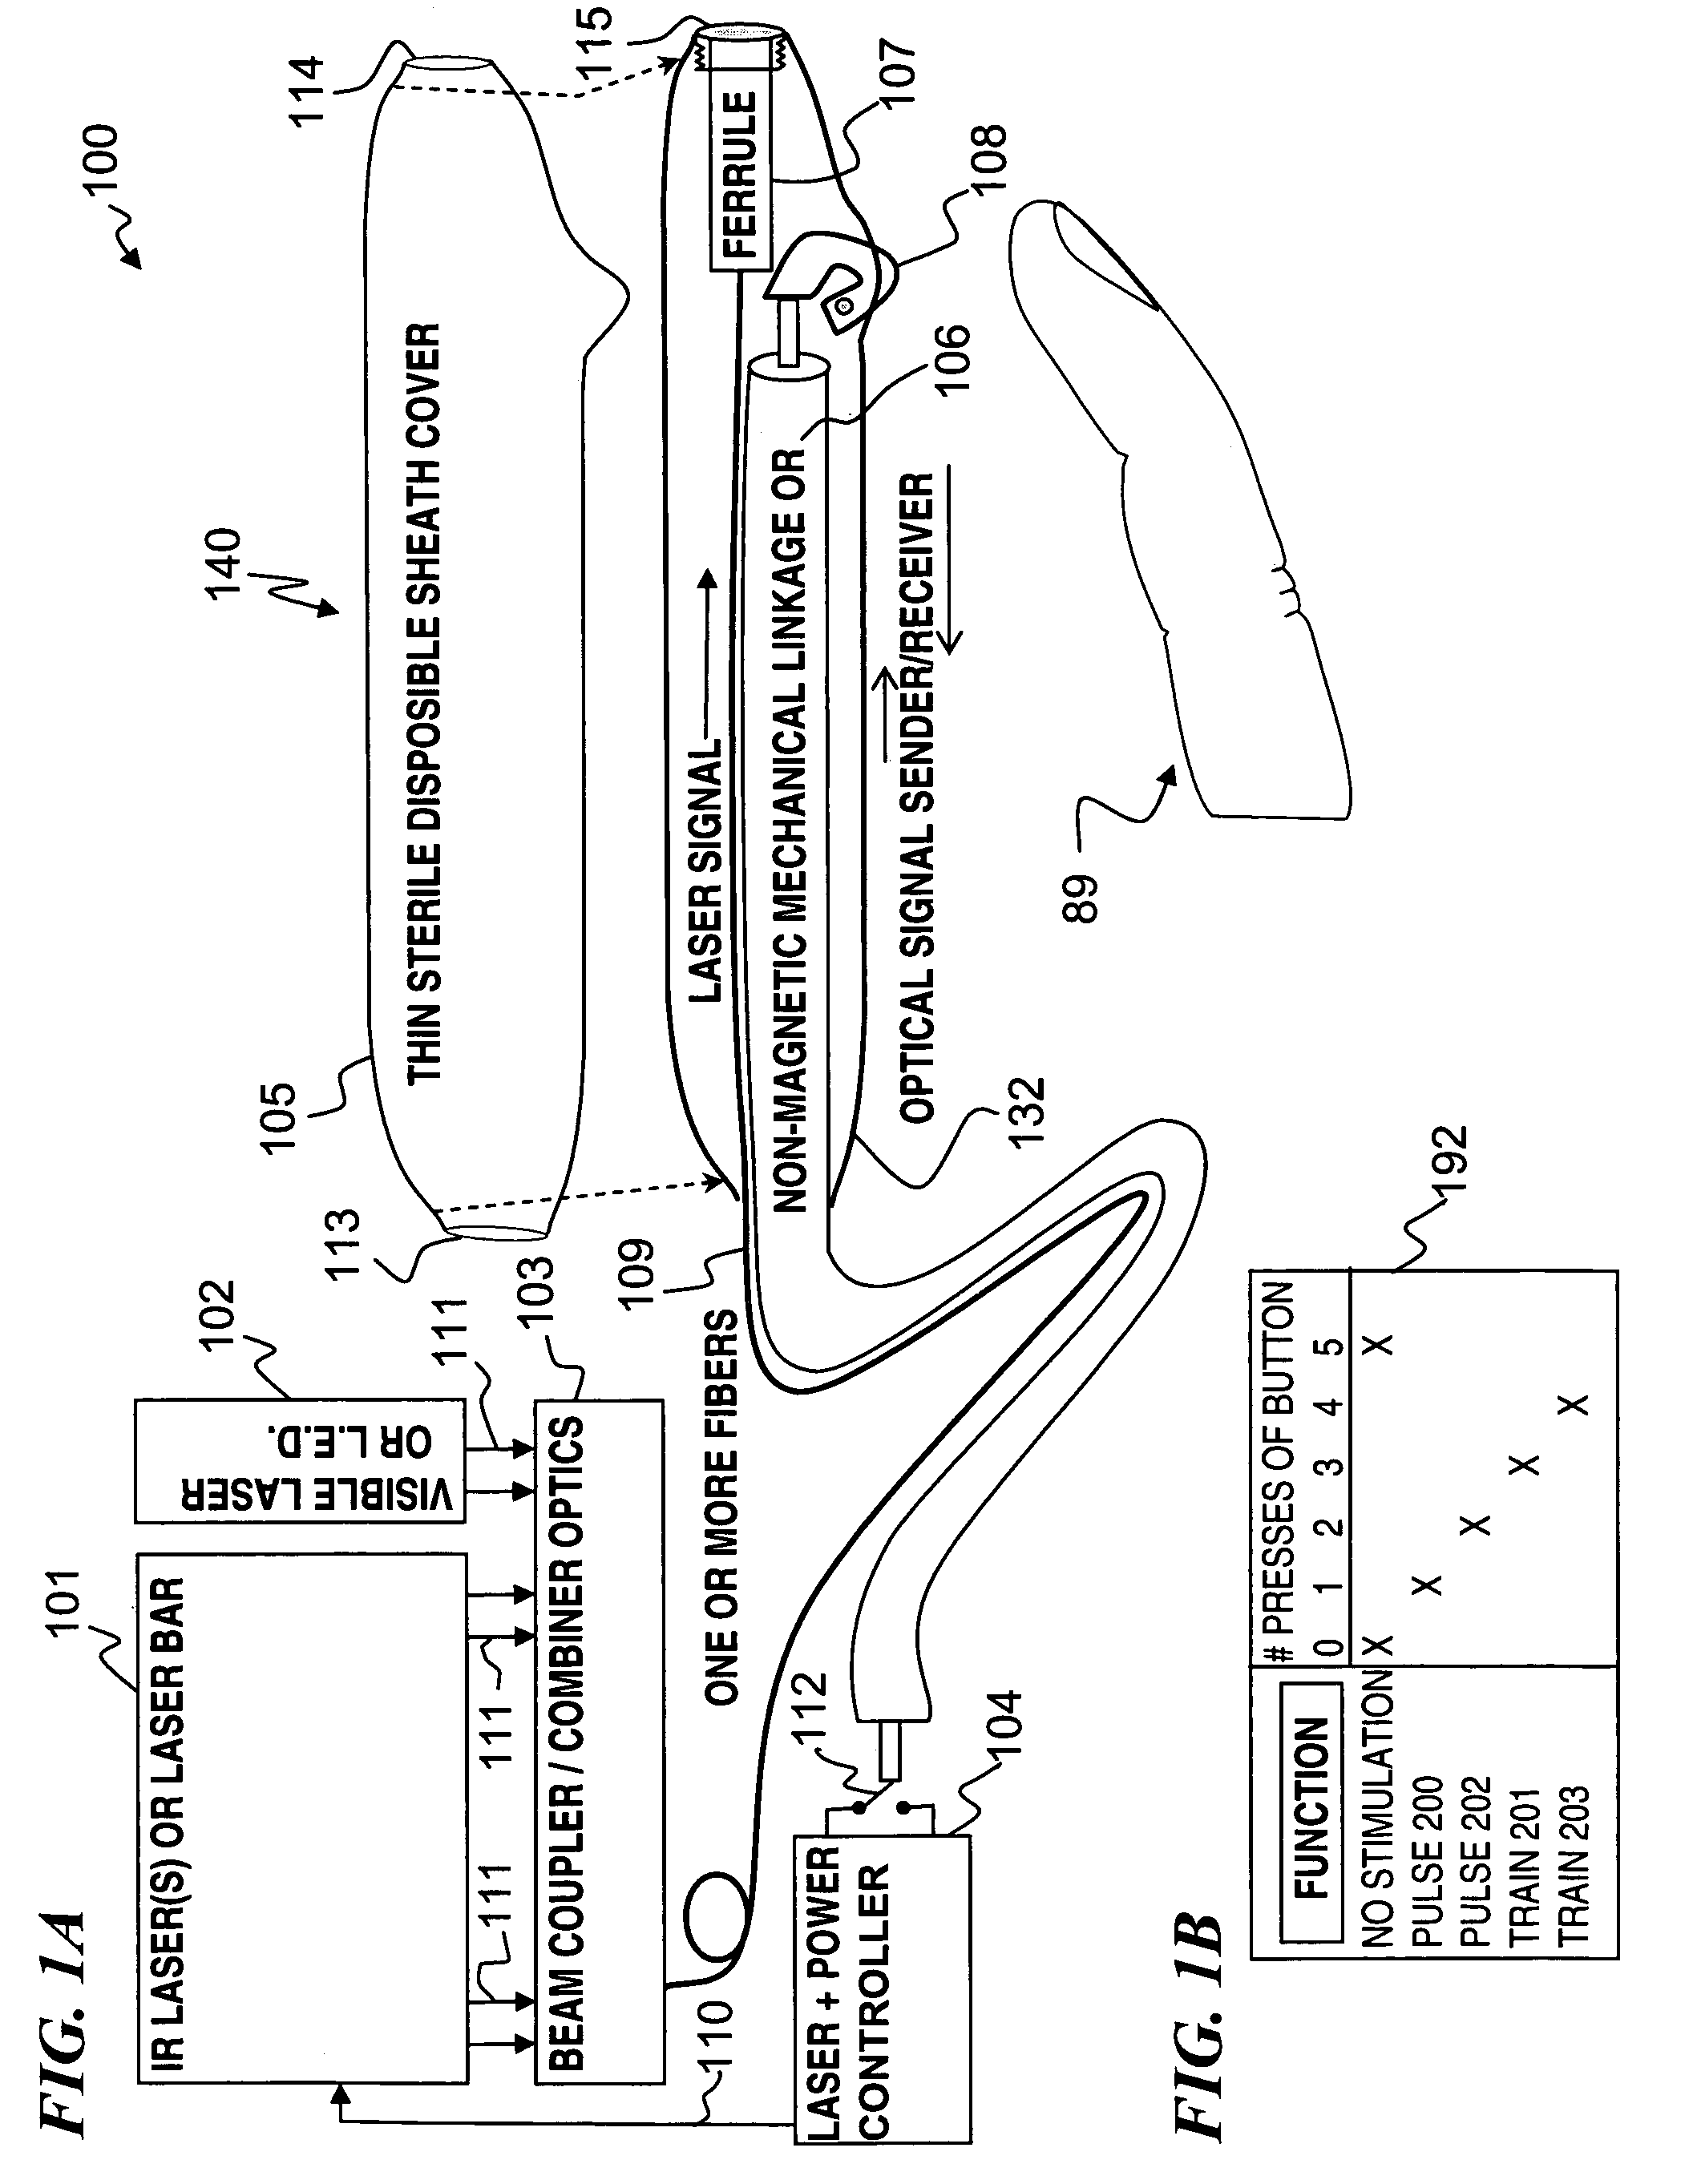 Apparatus for optical stimulation of nerves and other animal tissue